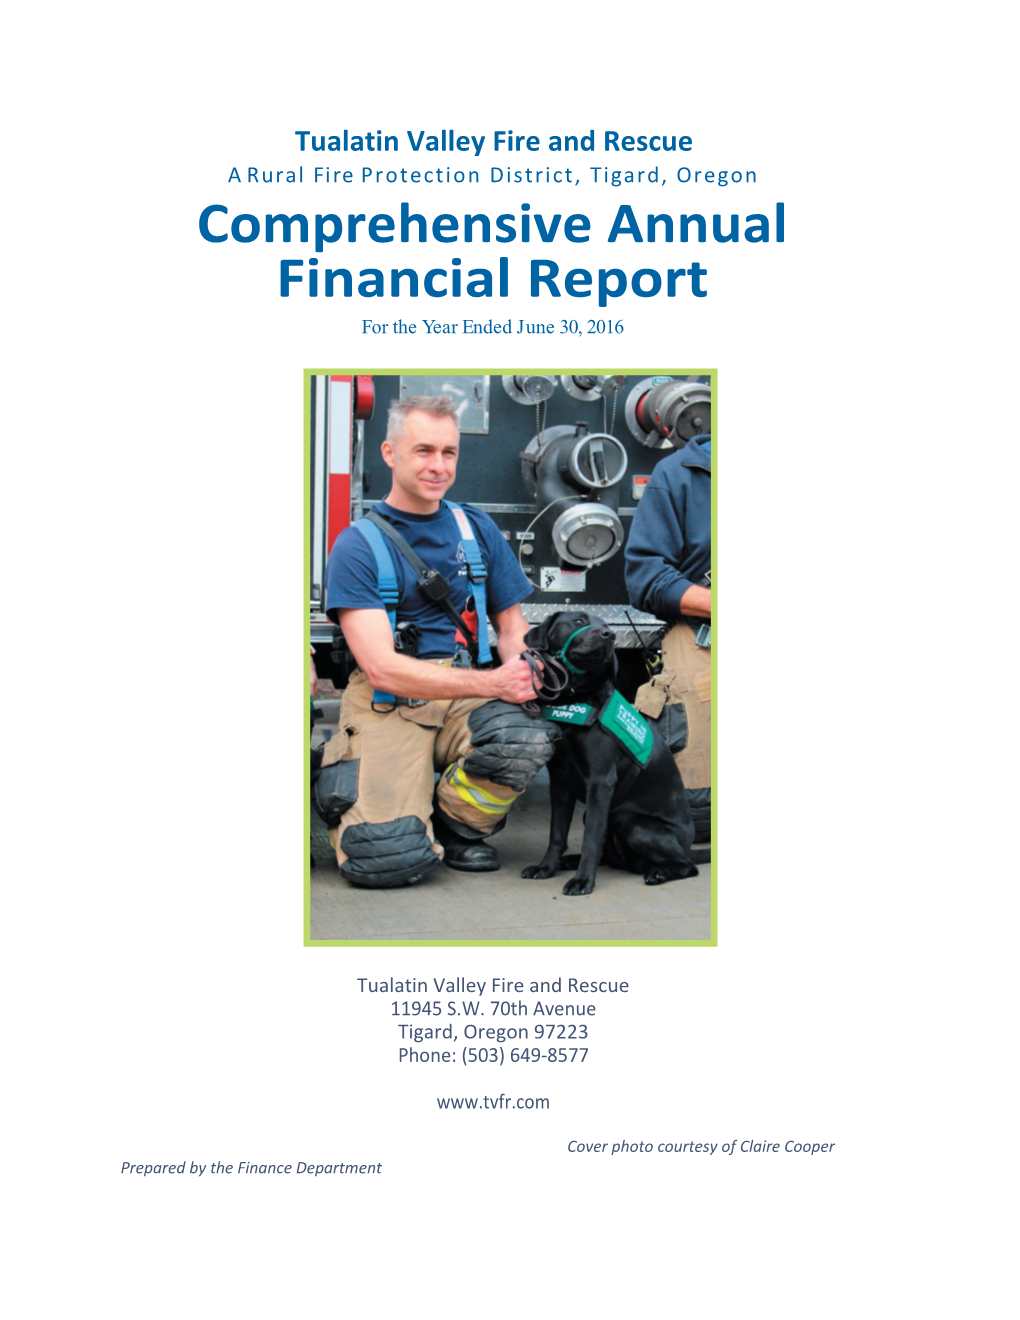 Comprehensive Annual Financial Report for the Year Ended June 30, 2016